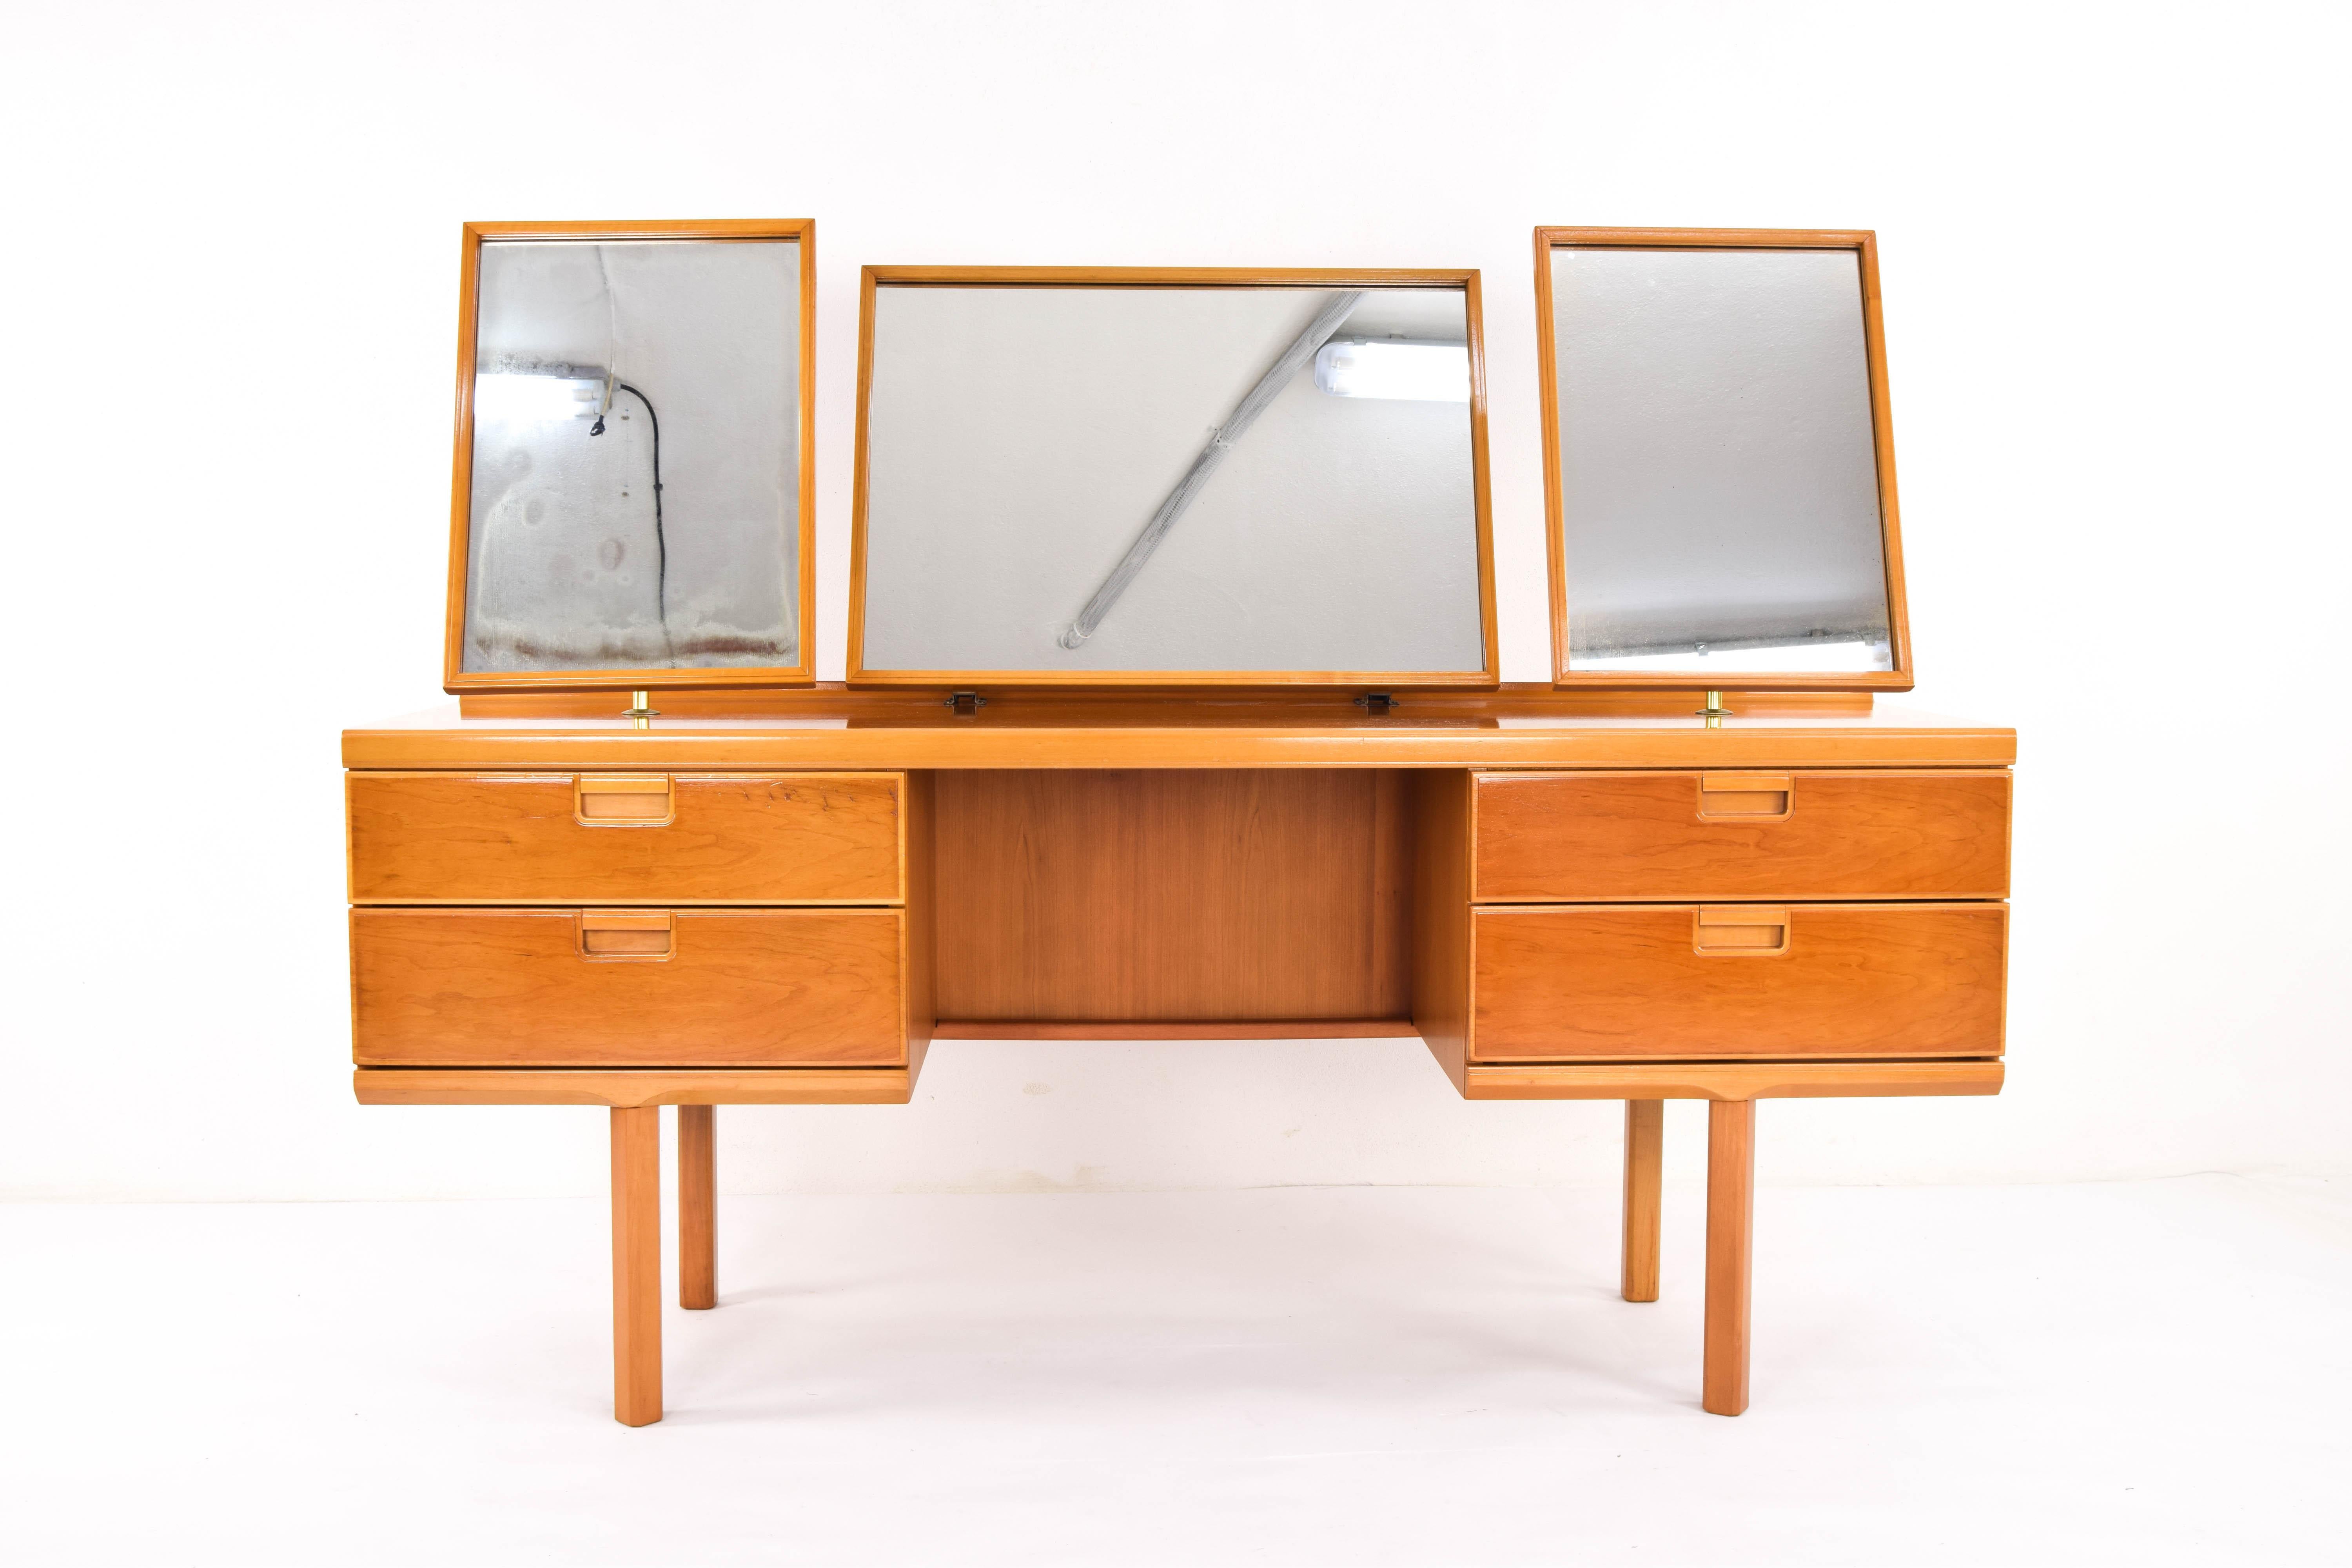 British beechwood dressing table from the late 1960s.
Composed of three mirrors with brass steel foot, four drawers and octagonal legs. Their mirrors have their own patina of the years, to a greater extent the one to the left of the images.